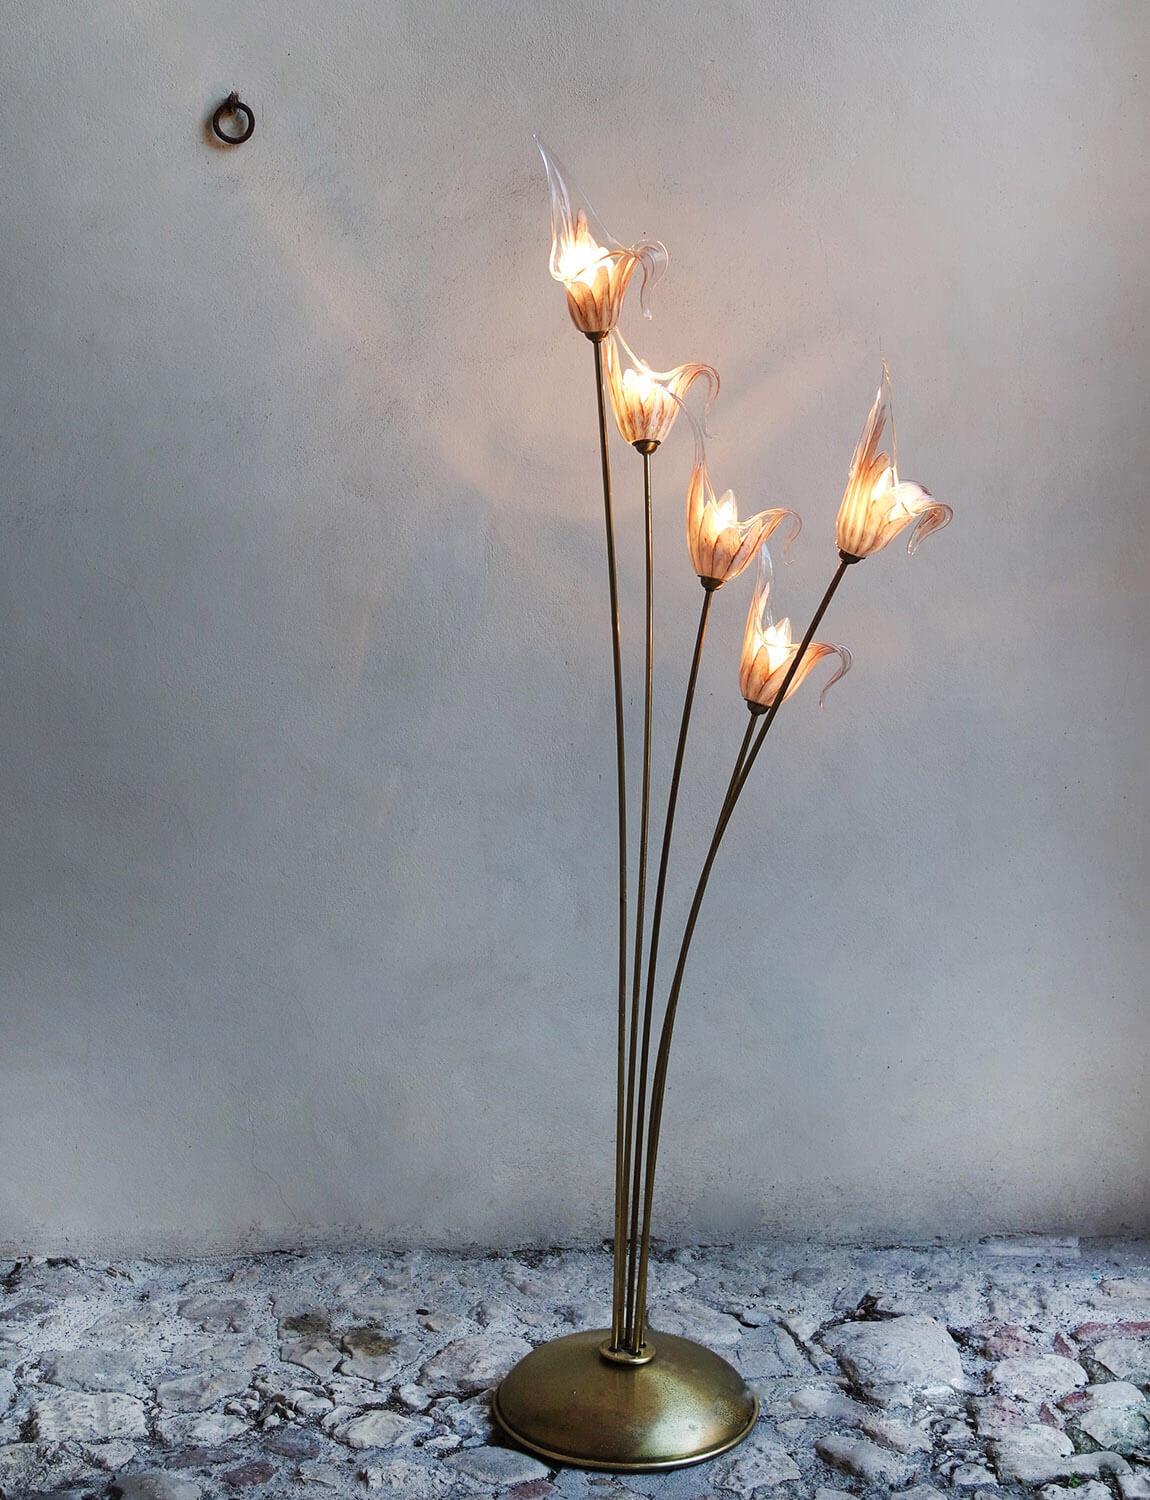 Found in a palazzo in Naples, this extraordinary Murano glass floor lamp has five hand-blown tulip-like glass flowers surrounding each bulb. The hand-blown coloured glass of each flower is in very good condition. The brass 'branches' move around